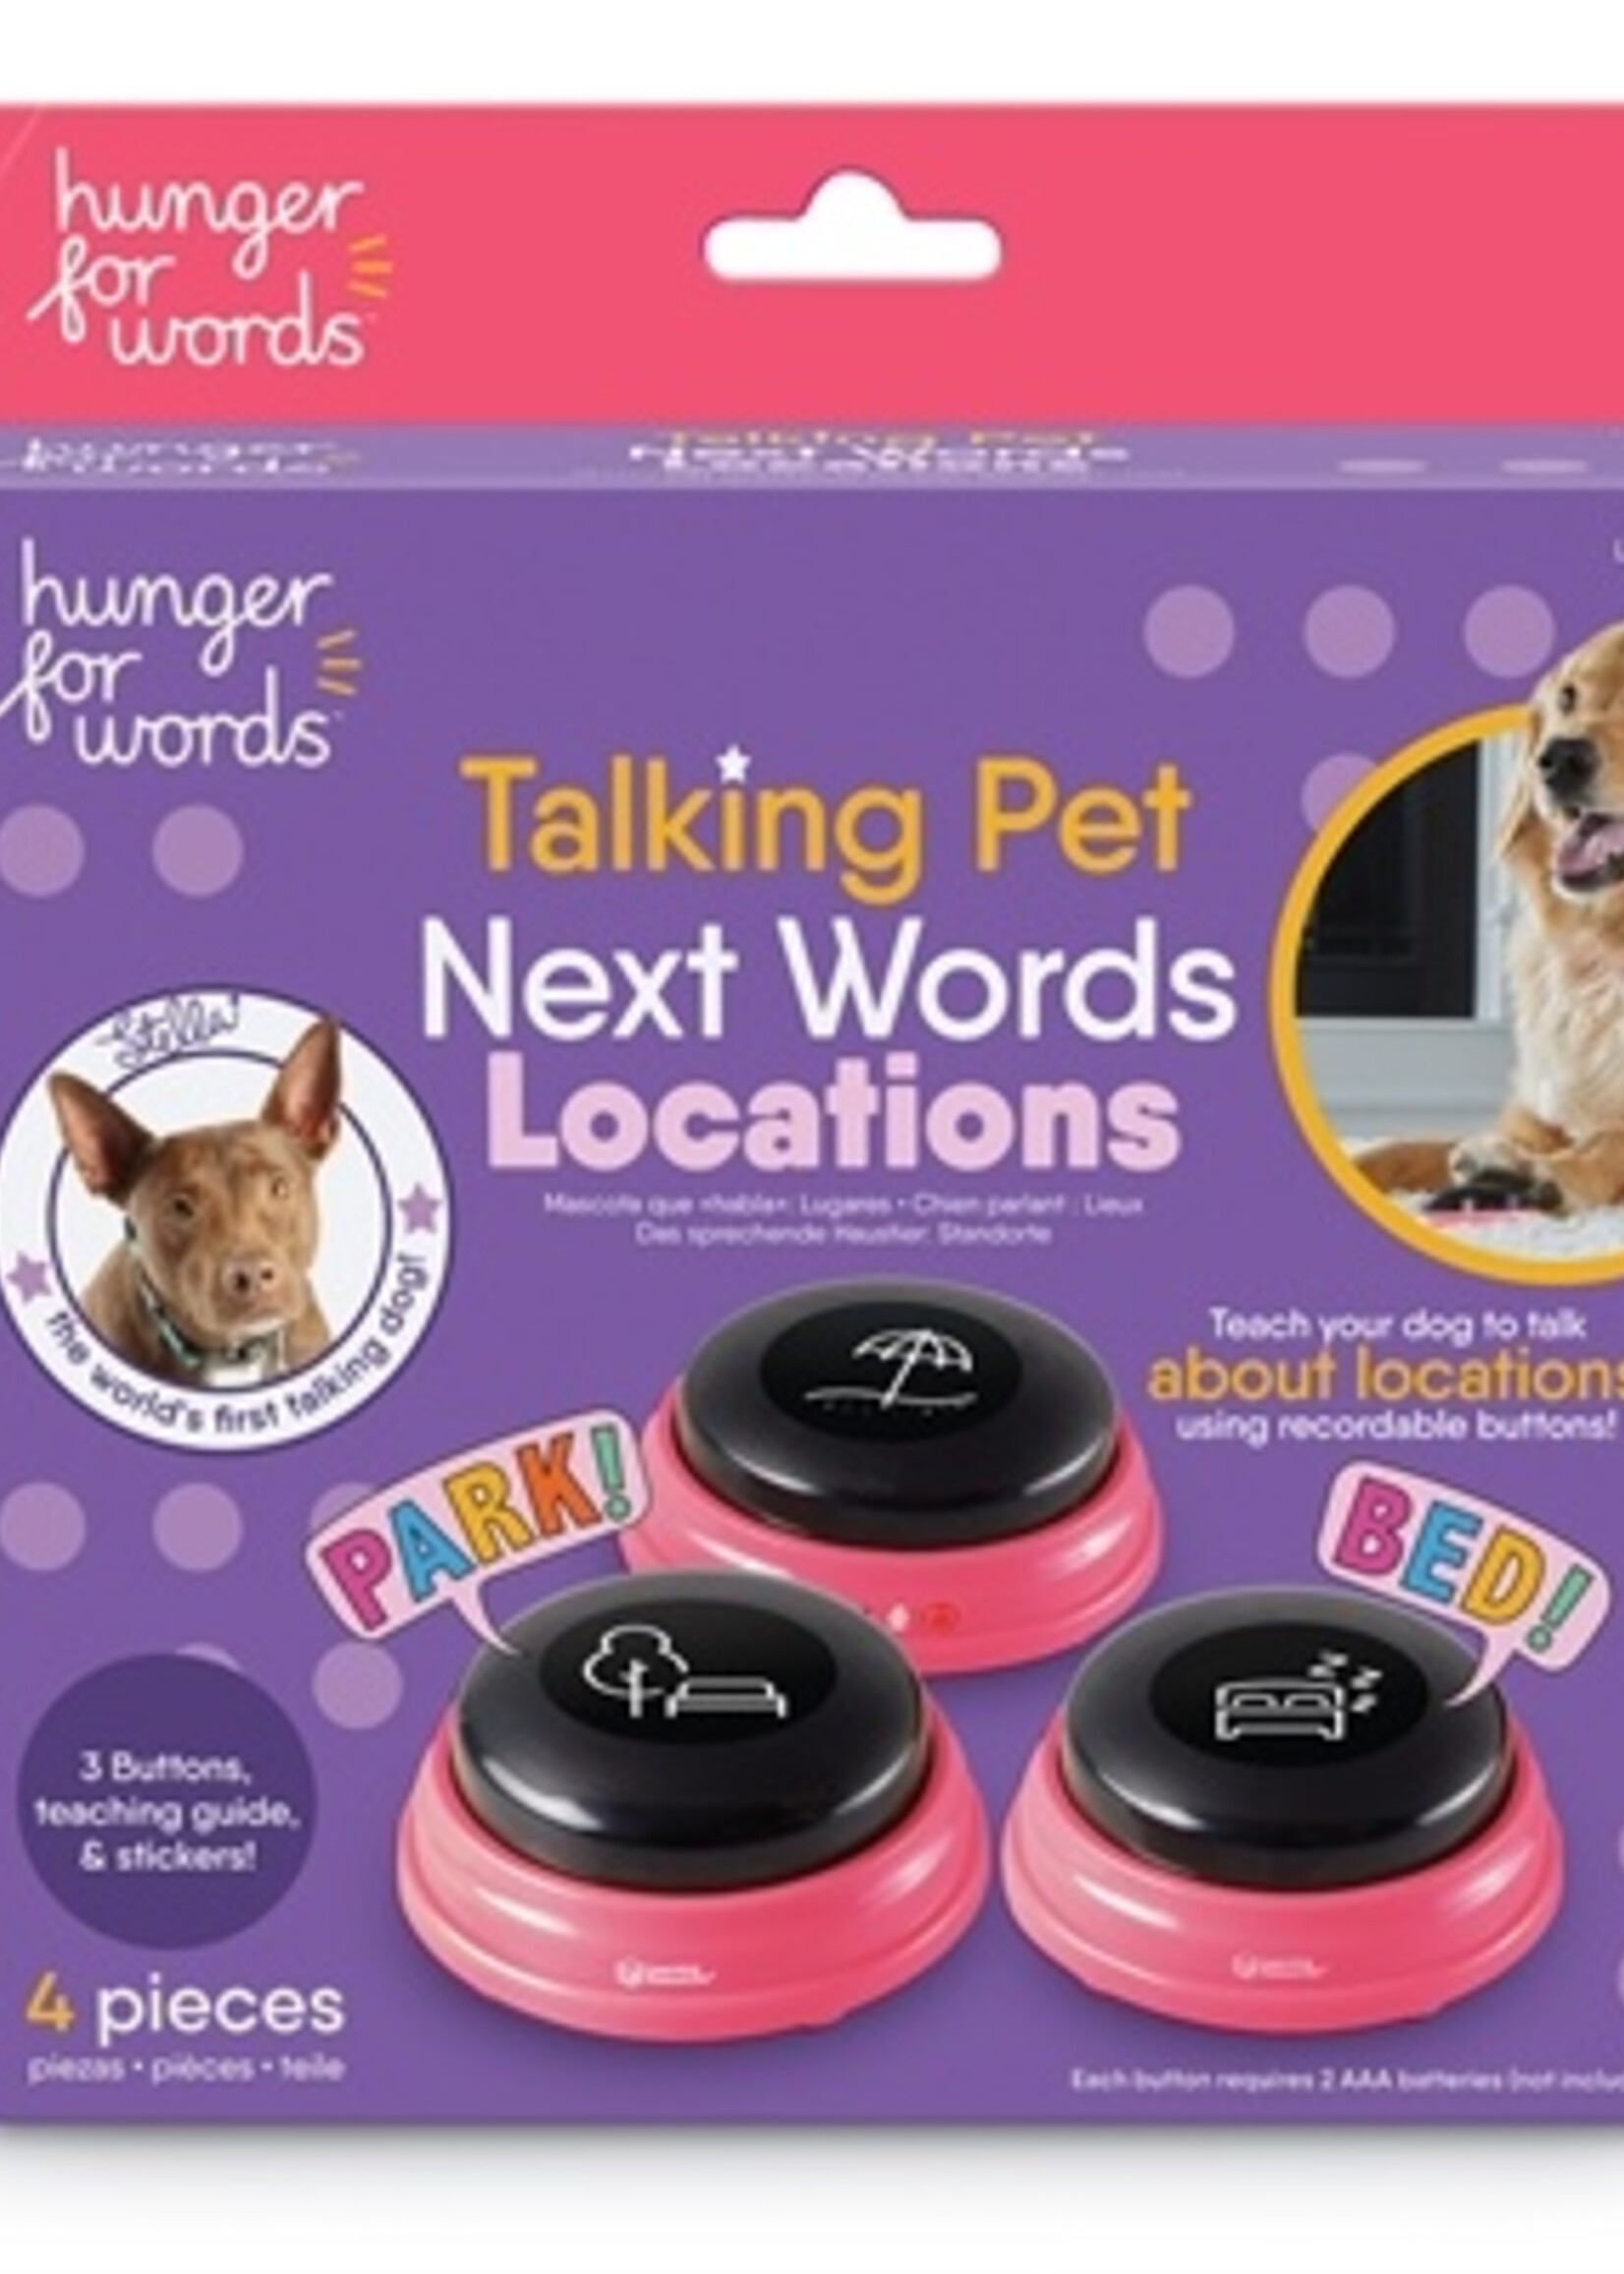 Hunger for words Hunger for words talking pet next words locations